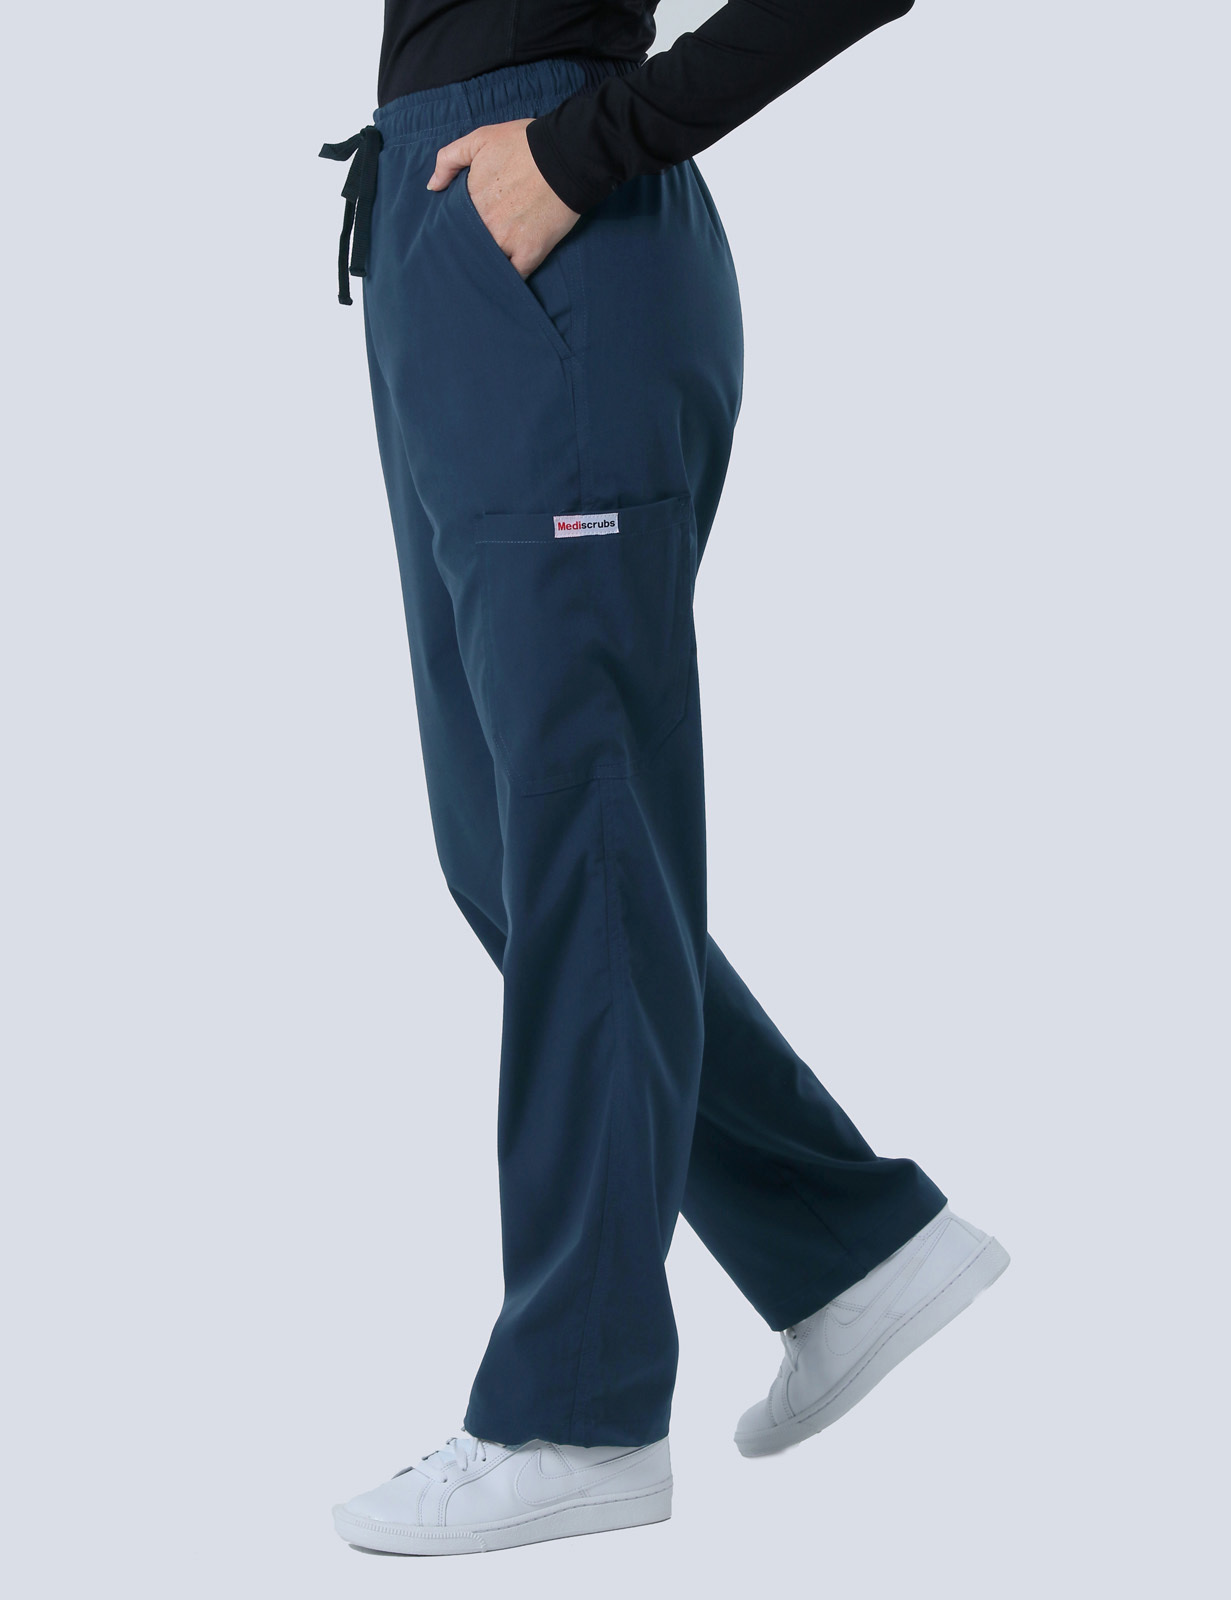 Gympie Hospital - Registered Nurse (Women's Fit Spandex Scrub Top and Cargo Pants in Navy incl Logos)